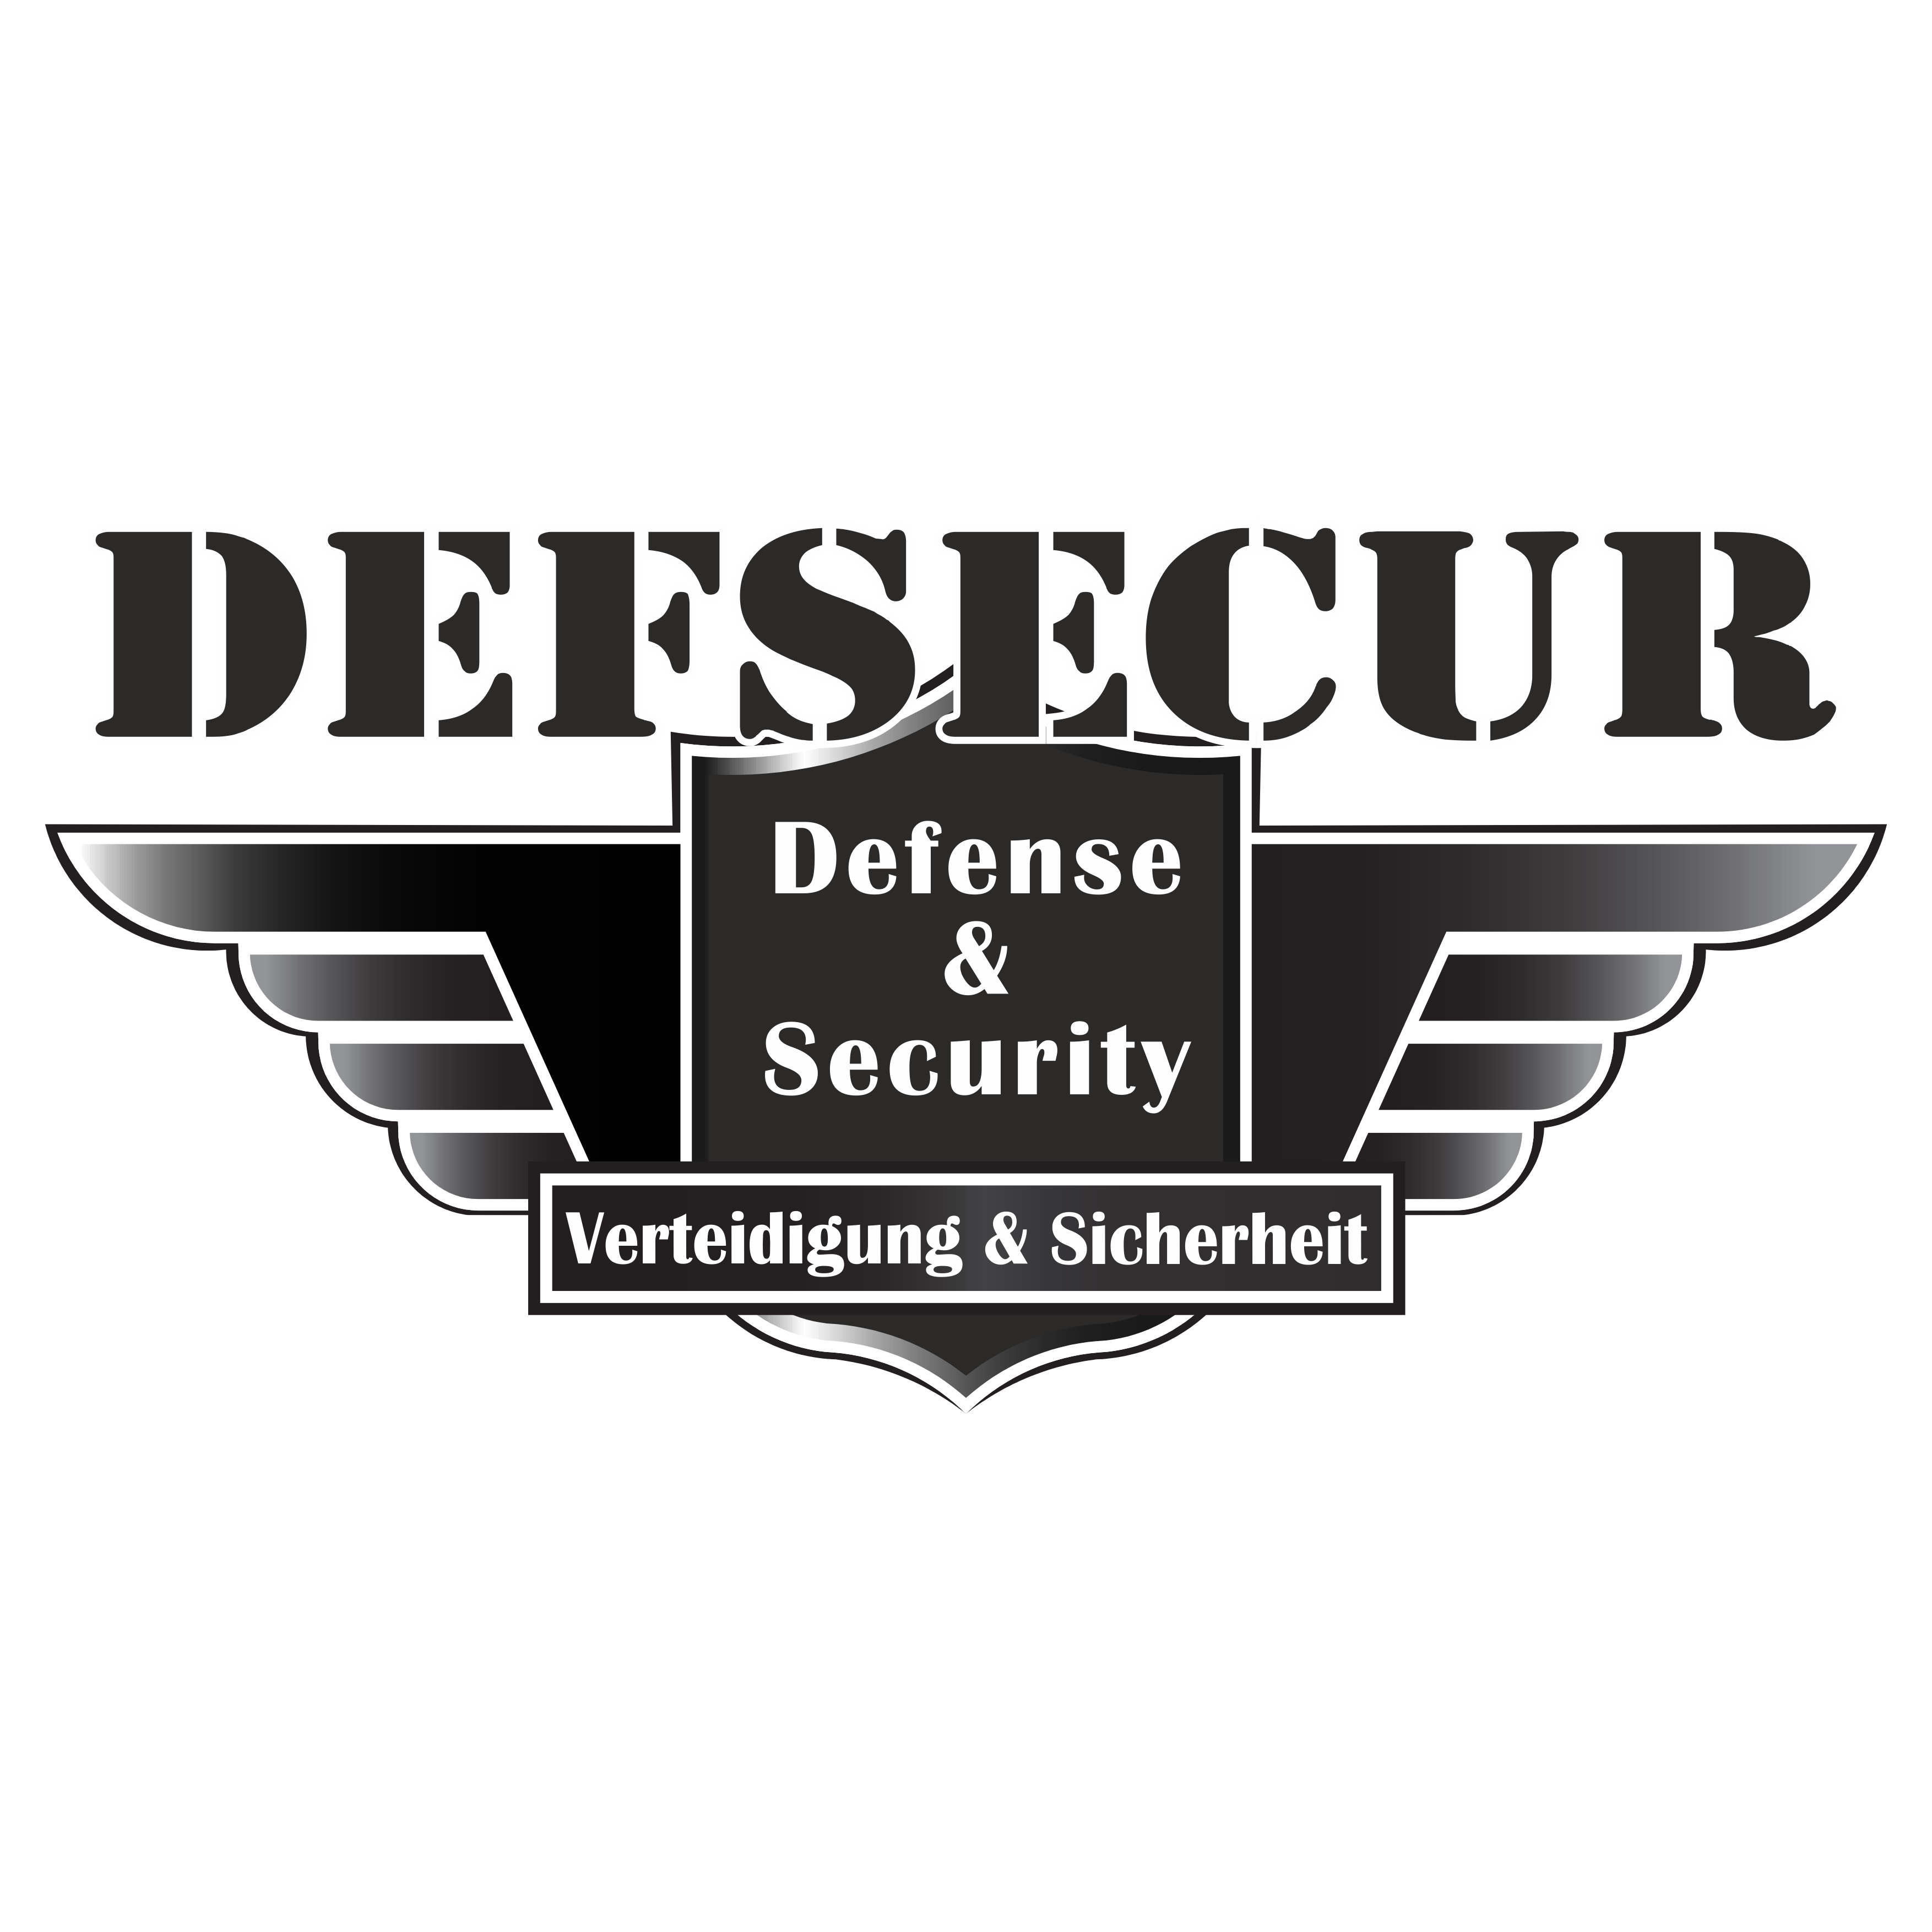 Logo DEFSECUR Consulting Defence & Security